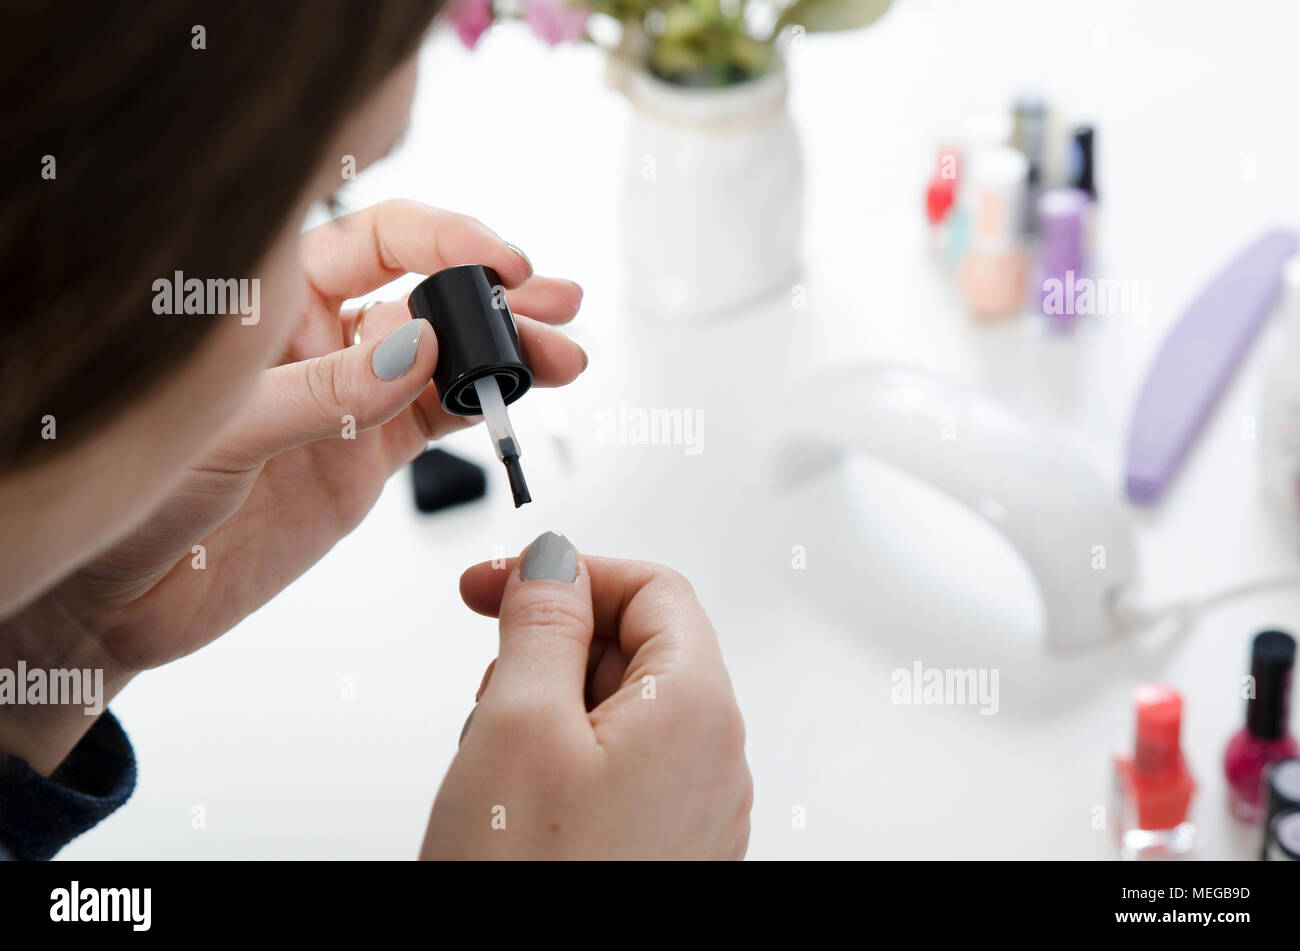 Woman carefully painting her finger nails. UV light dryer in background Stock Photo